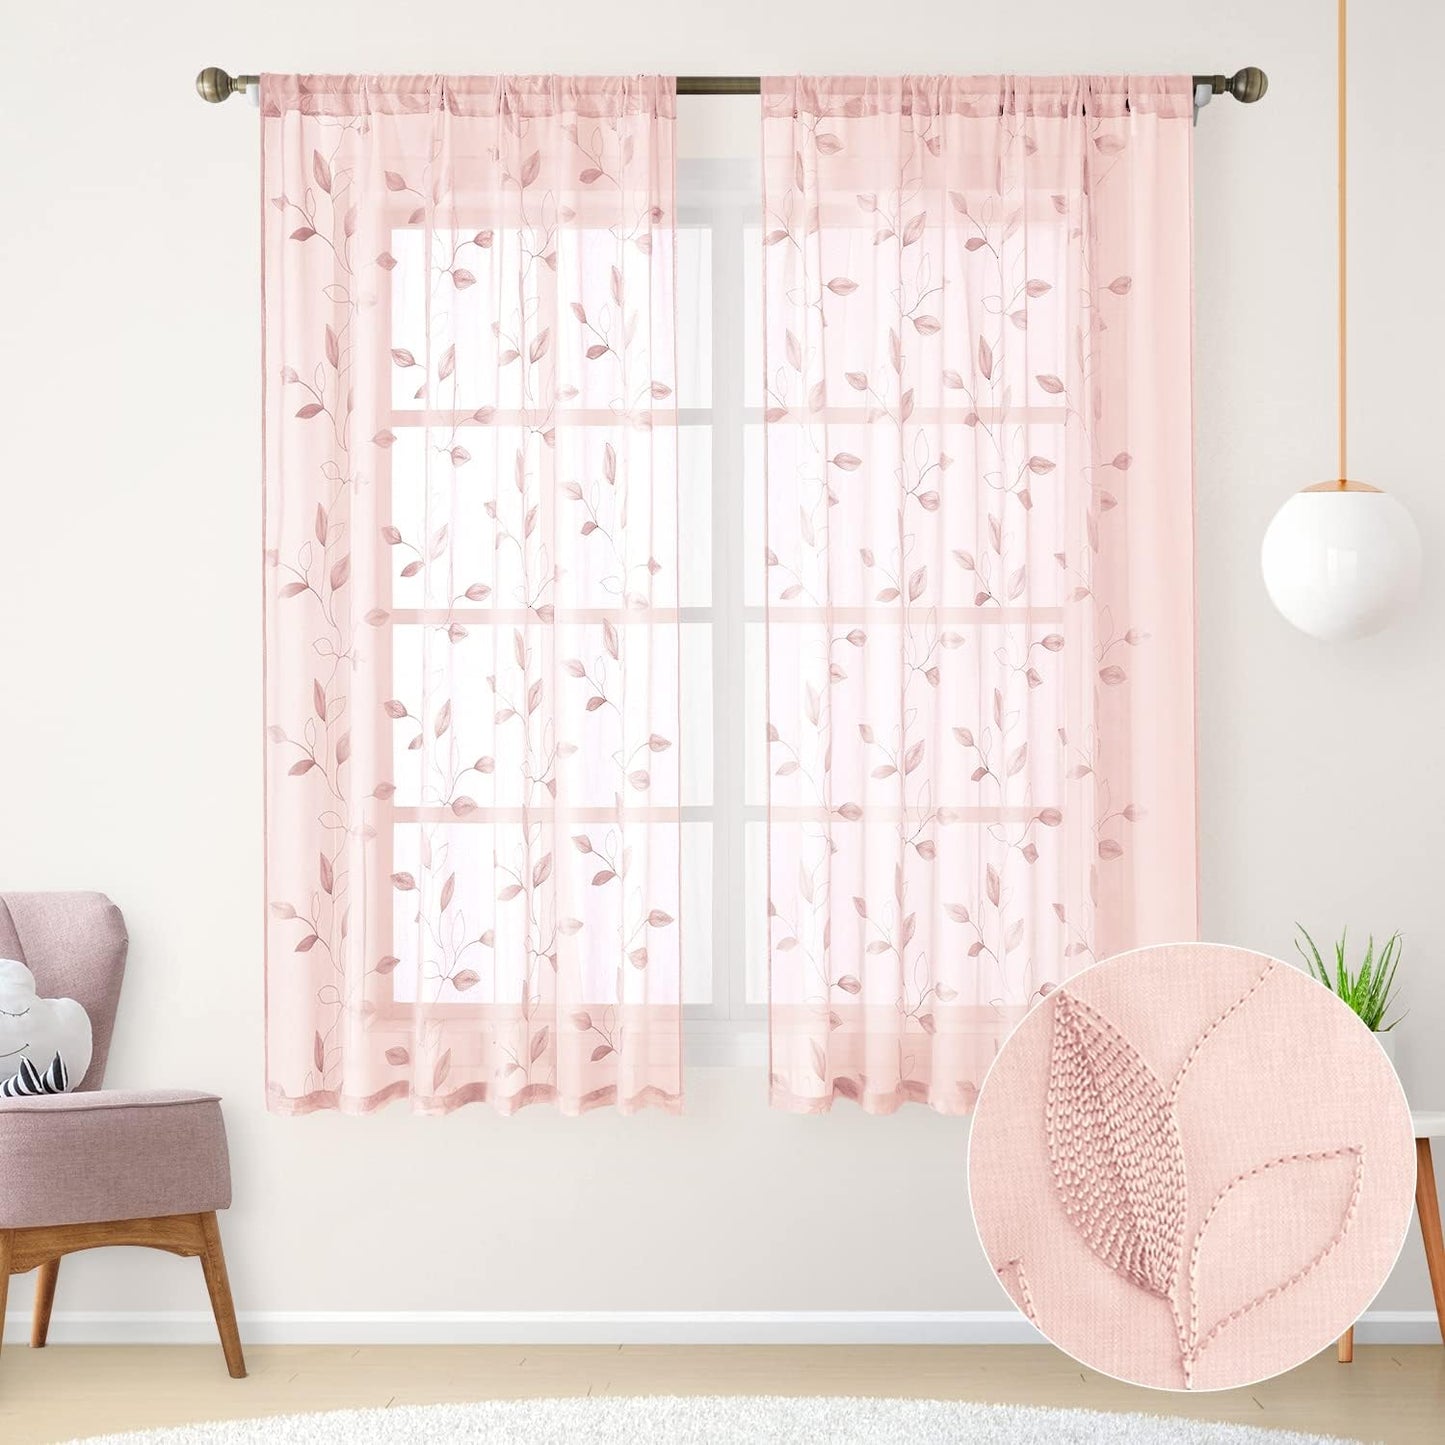 HOMEIDEAS Sage Green Sheer Curtains 52 X 63 Inches Length 2 Panels Embroidered Leaf Pattern Pocket Faux Linen Floral Semi Sheer Voile Window Curtains/Drapes for Bedroom Living Room  HOMEIDEAS 6-Blush Pink W52" X L63" 